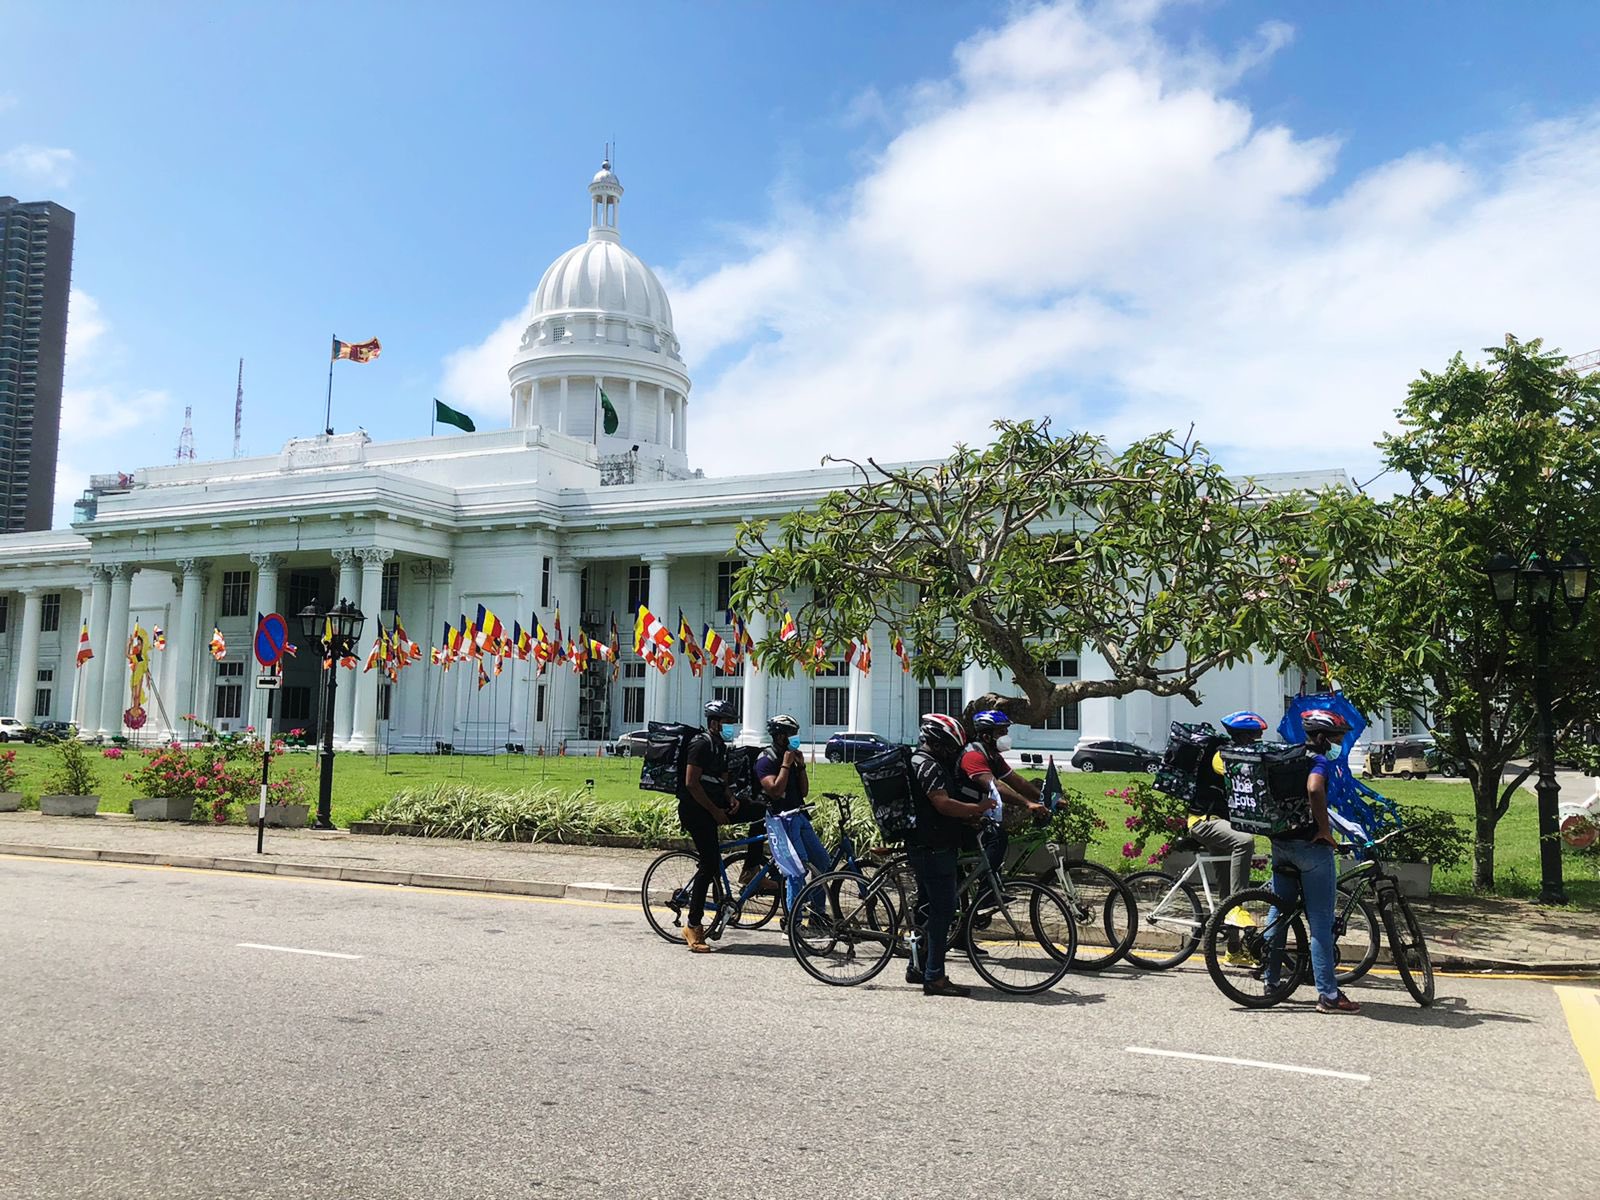 Uber Eats Sri Lanka deploying bicycle delivery amidst the ongoing fuel crisis